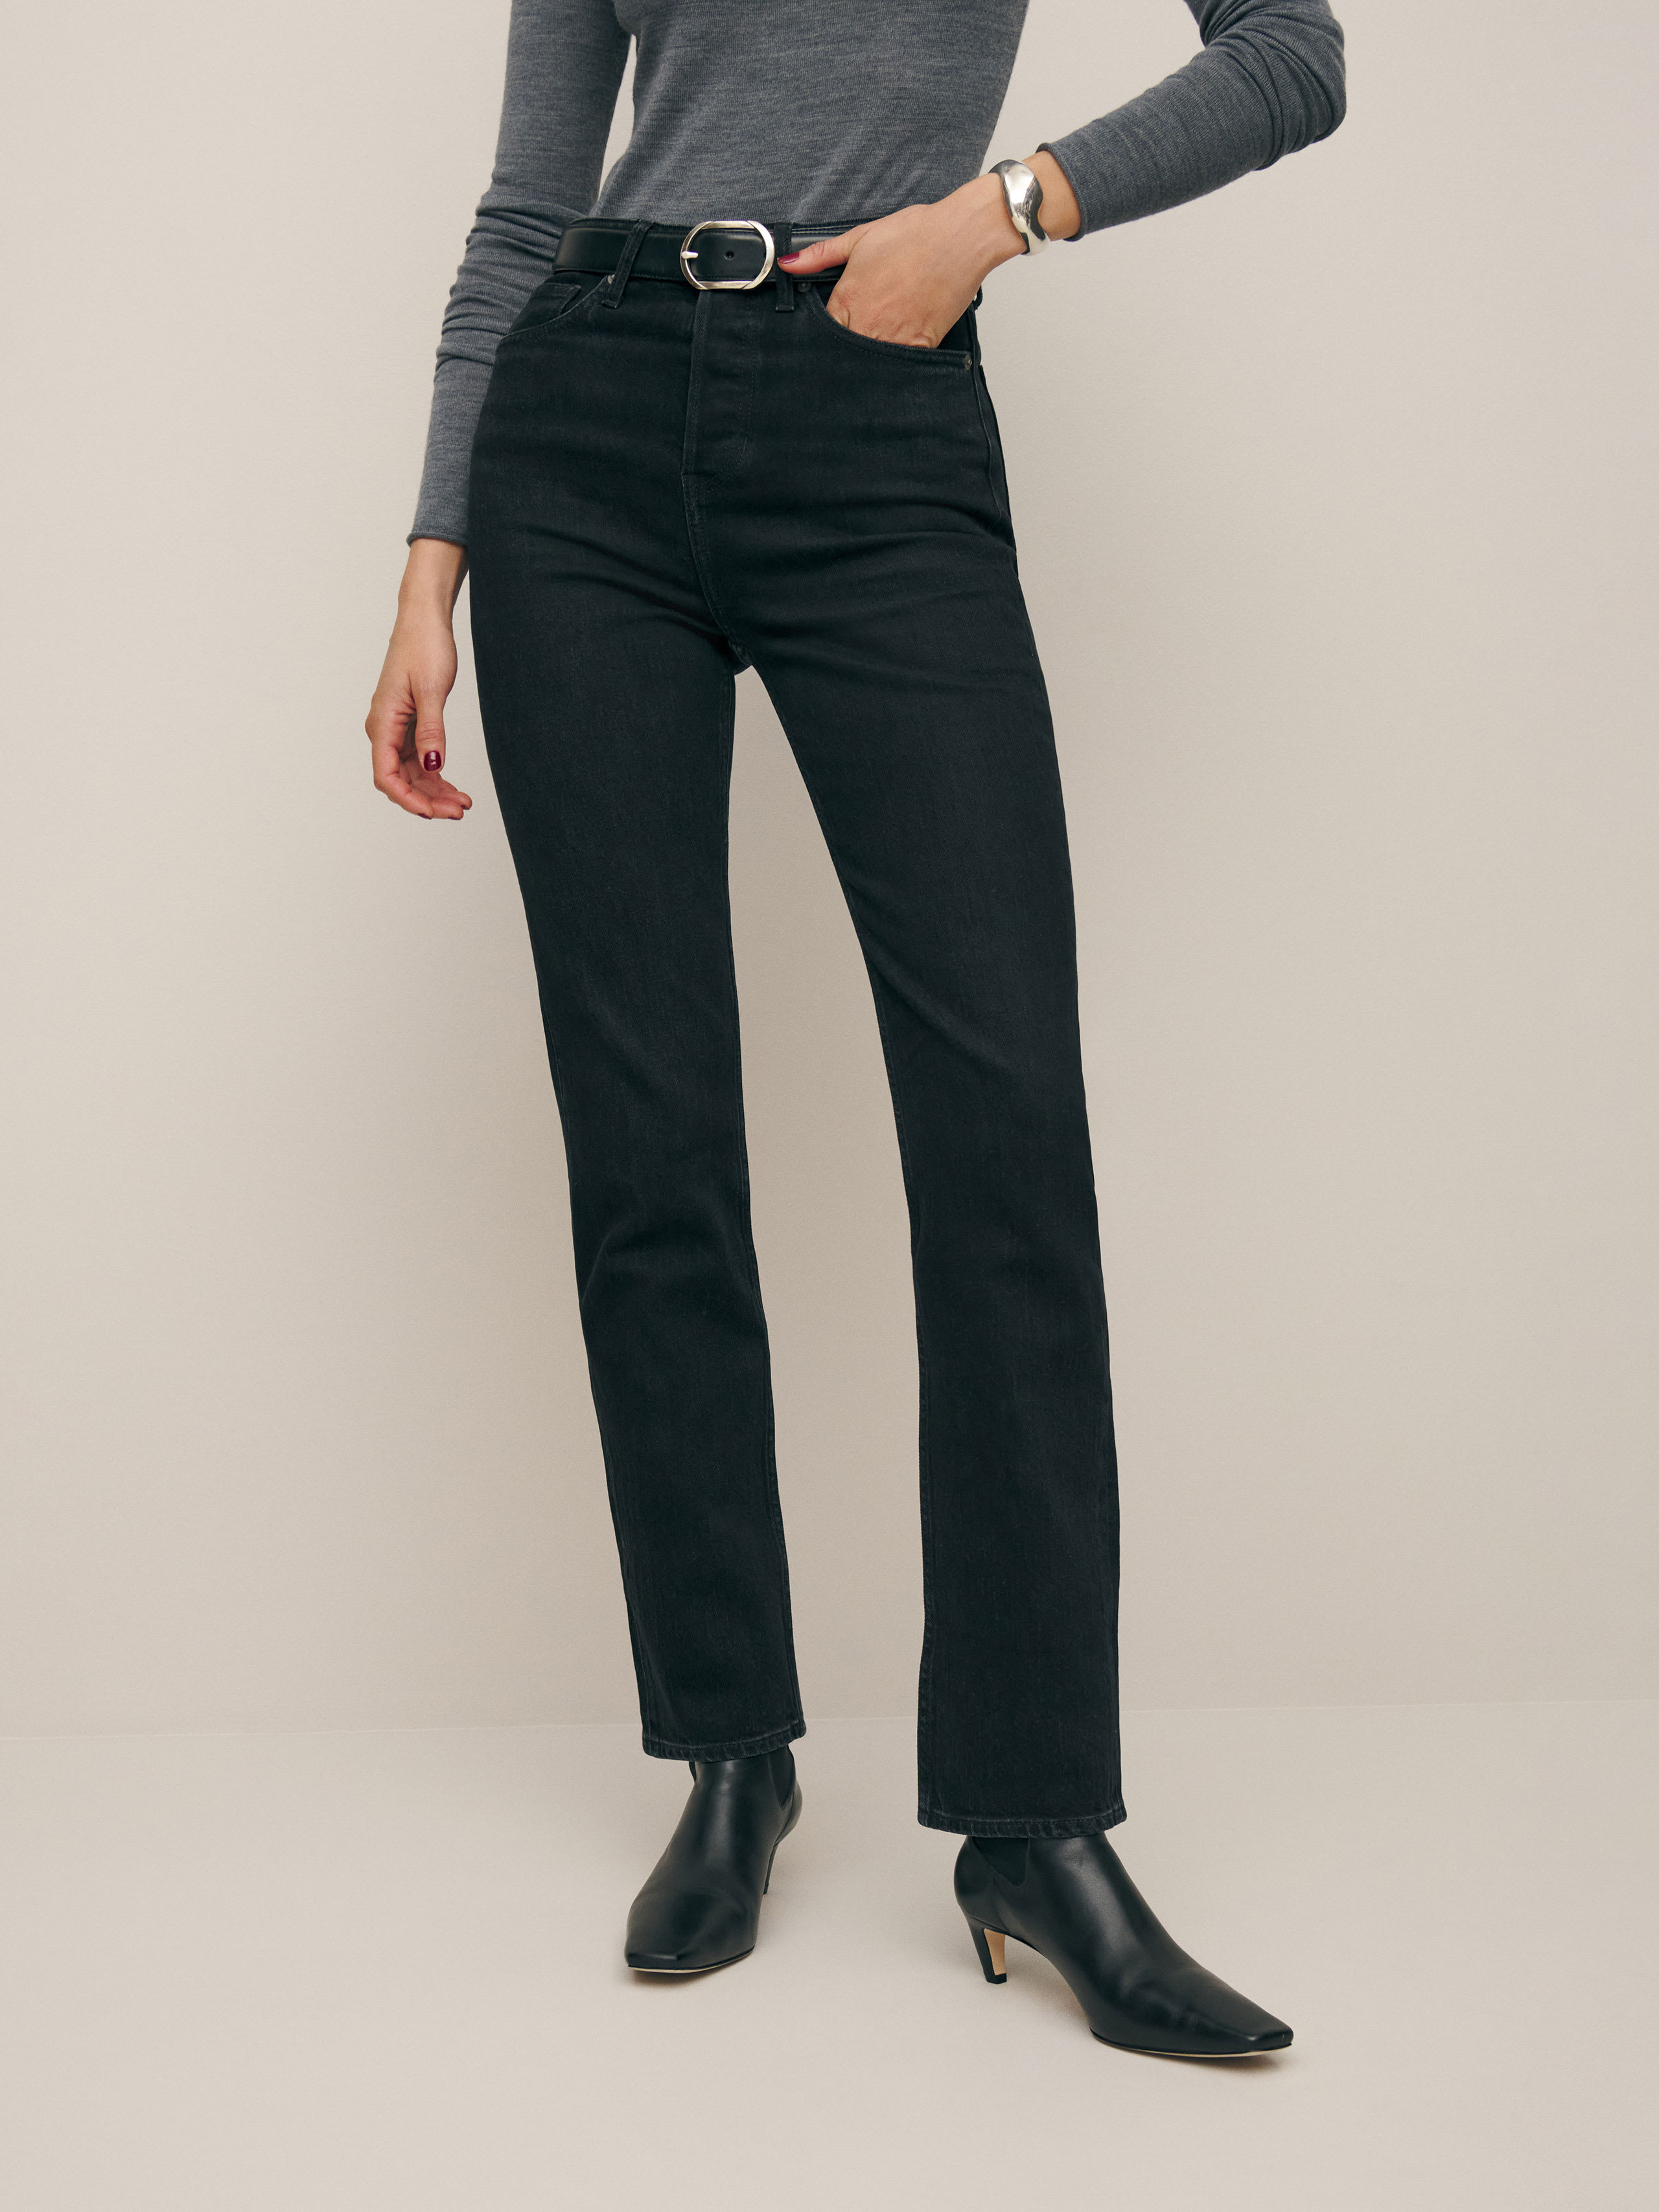 Reformation Cynthia Stretch High Rise Straight Jeans In Vana